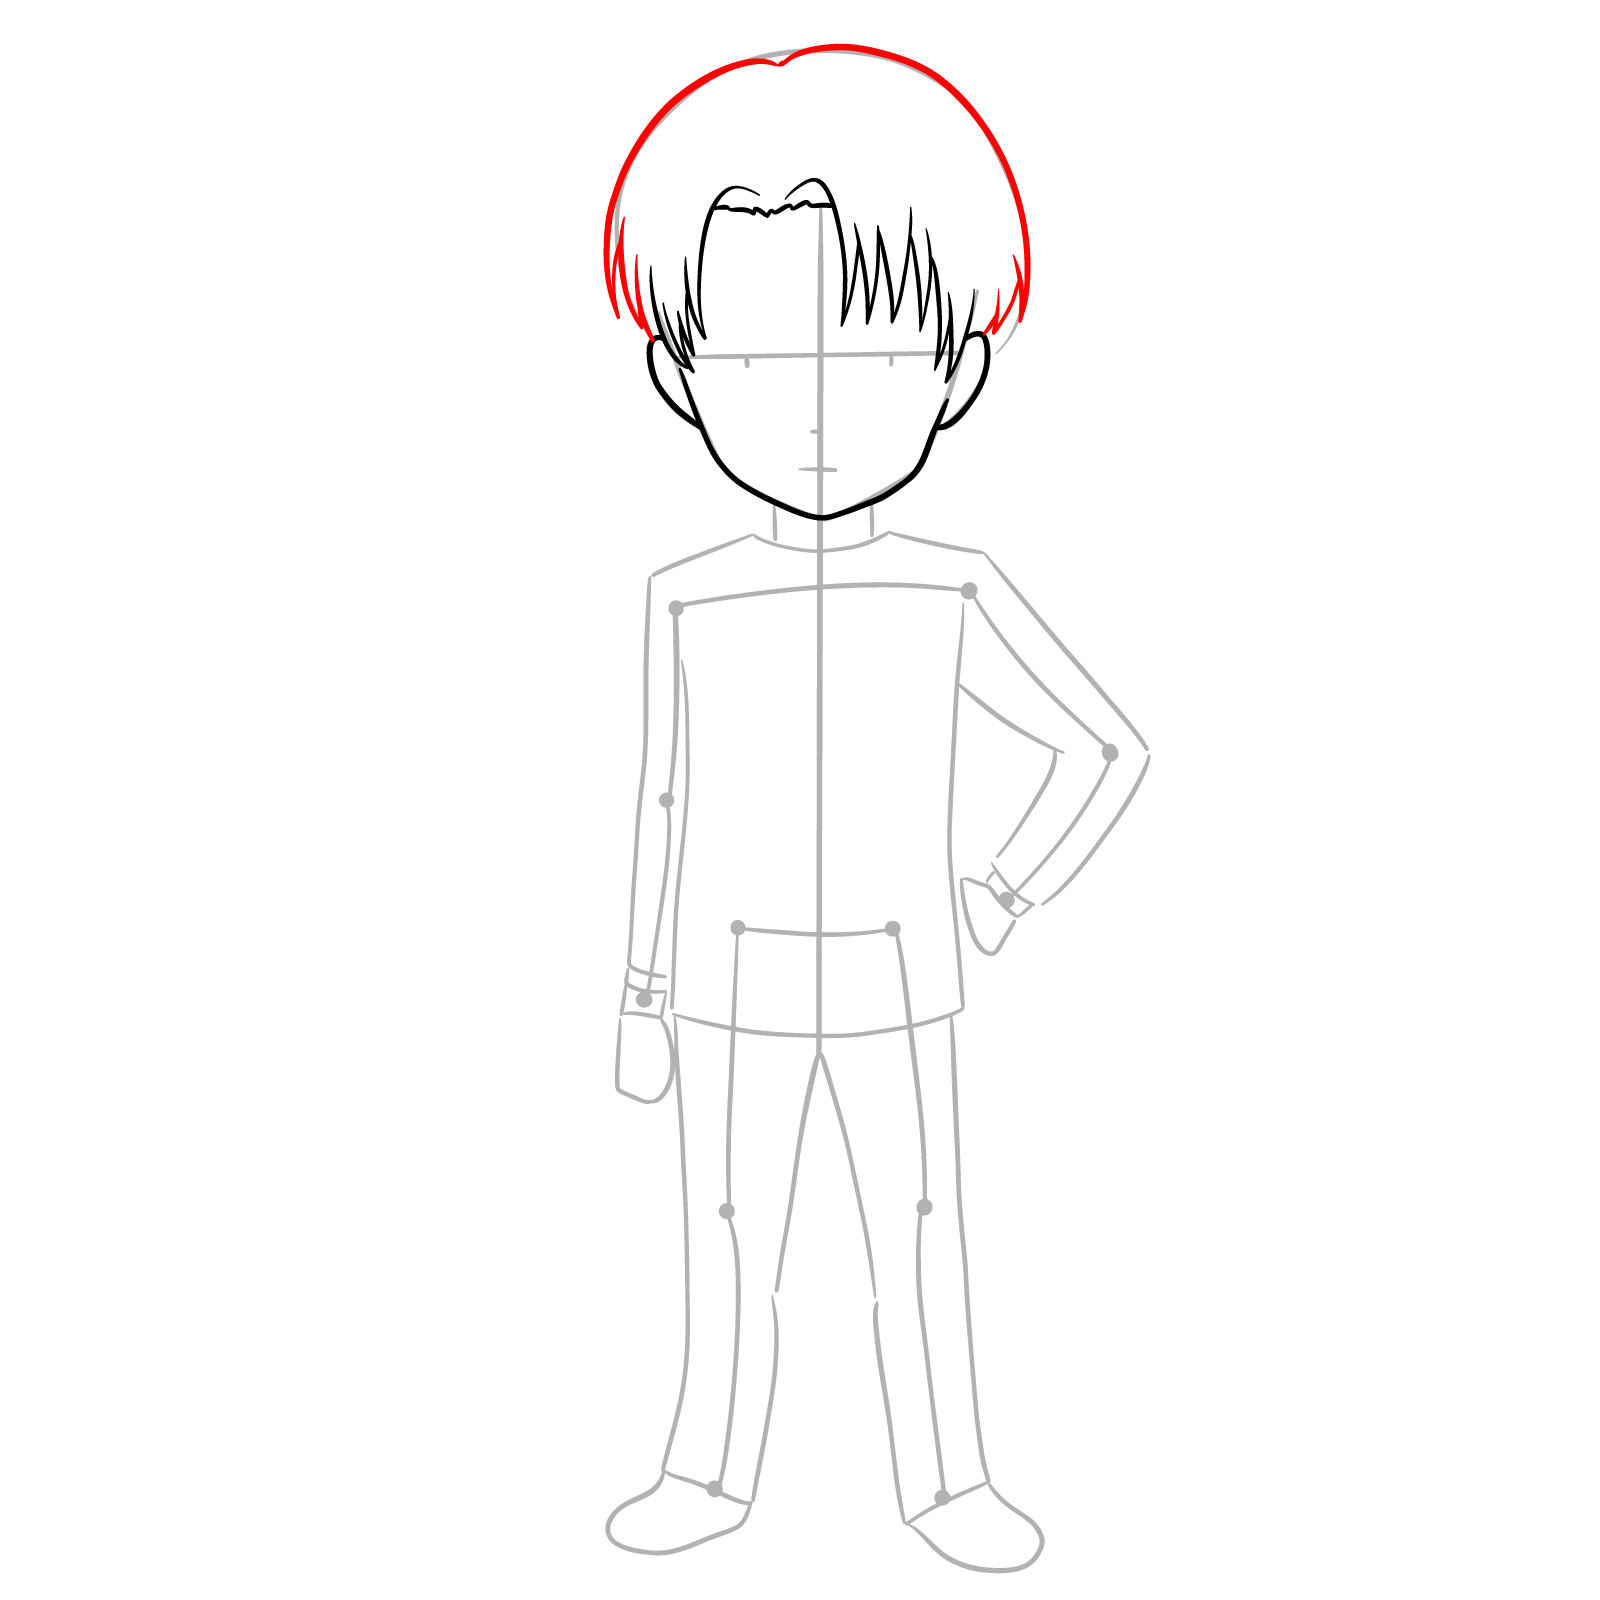 Chibi Levi drawing with hairstyle forms on top of the head - step 06